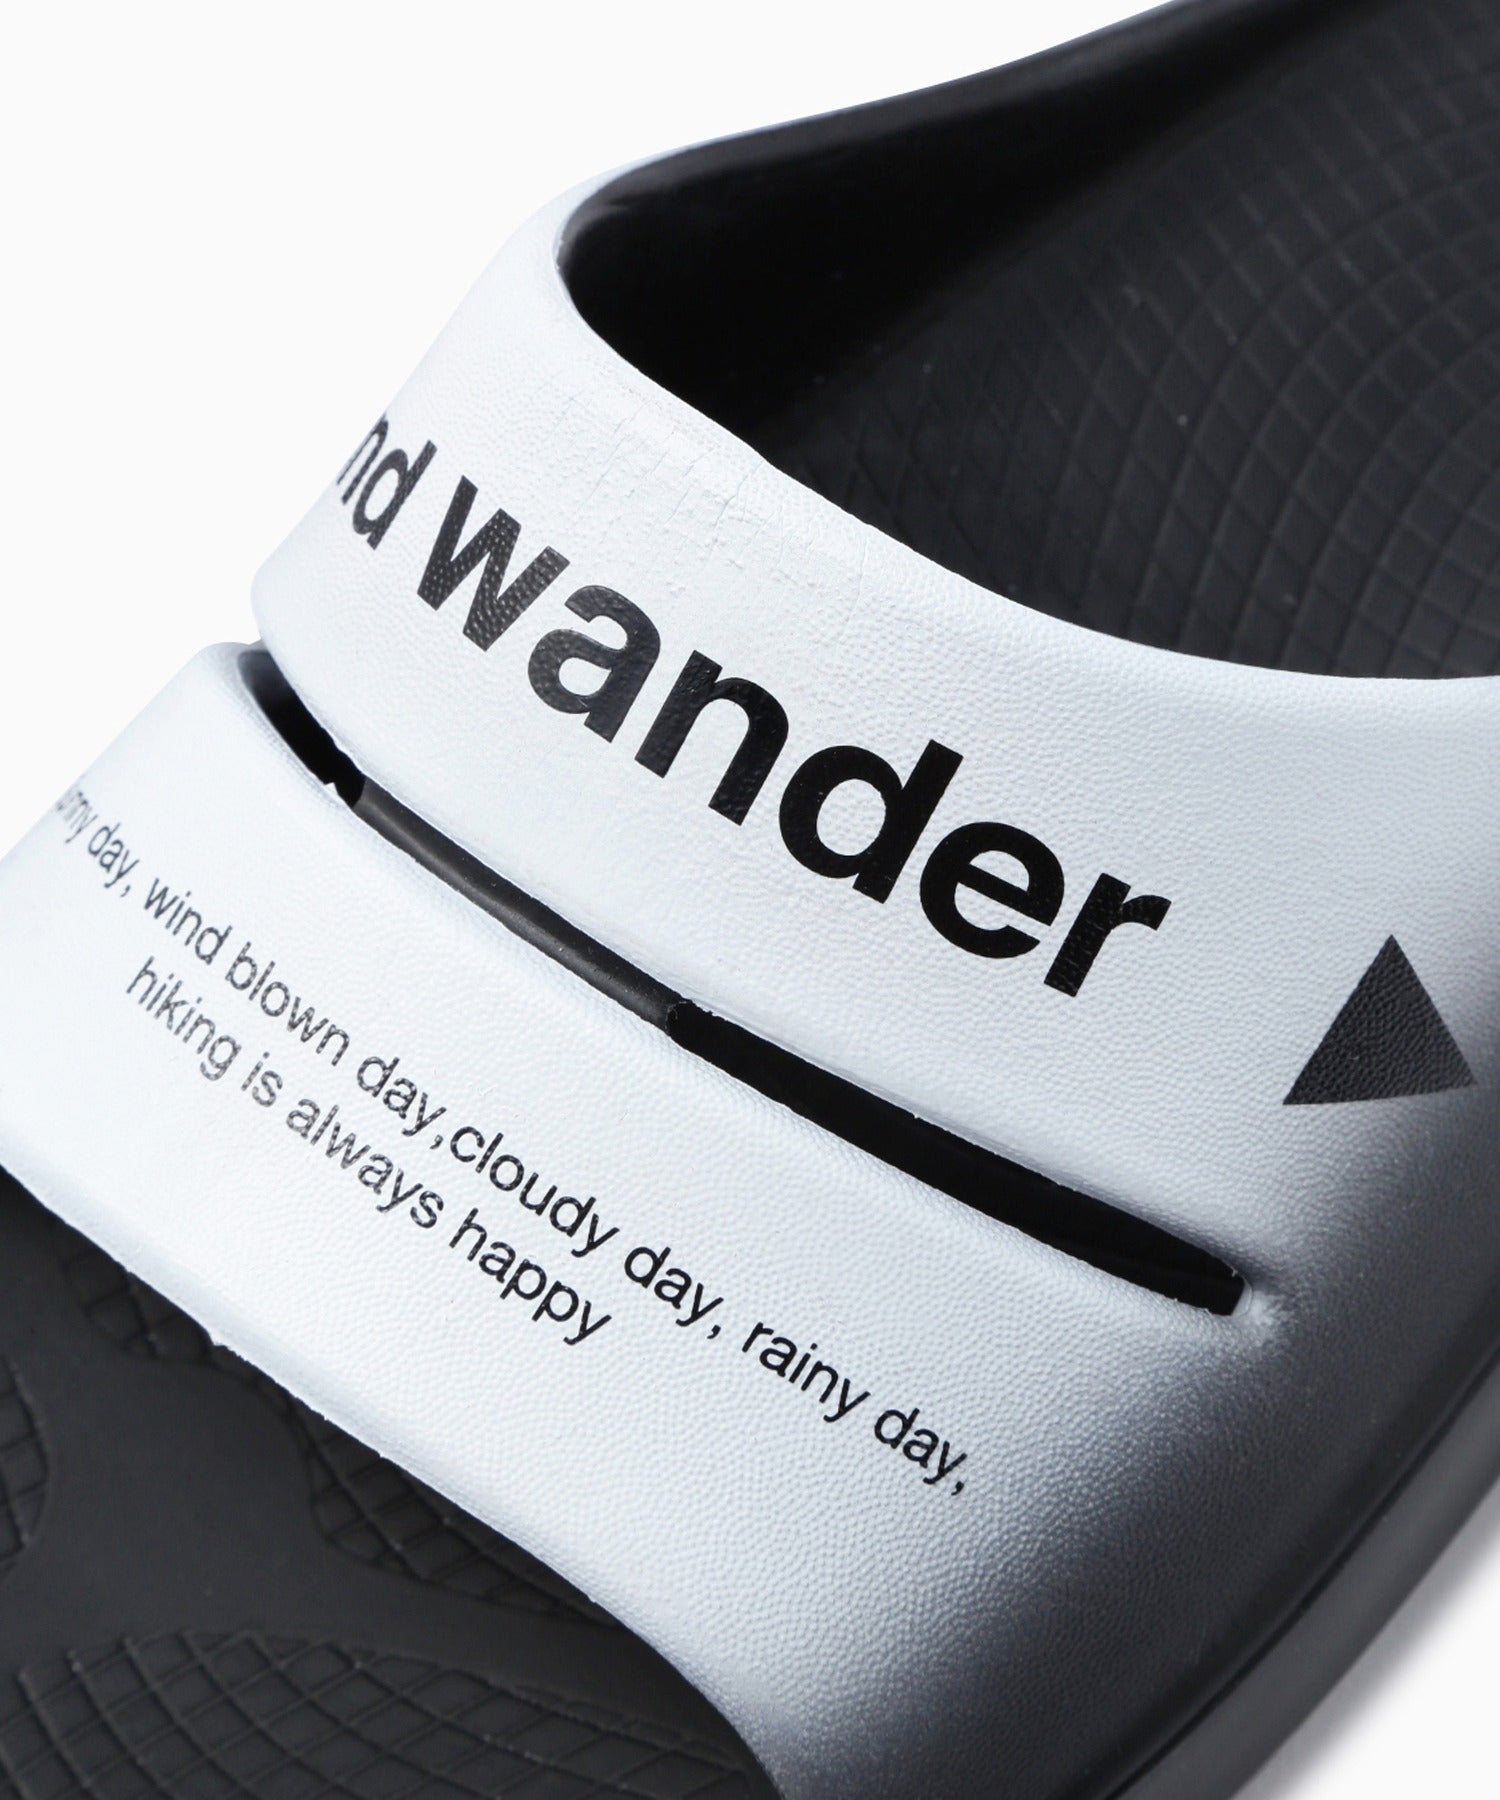 and wander×OOFOS Recovery Sandal